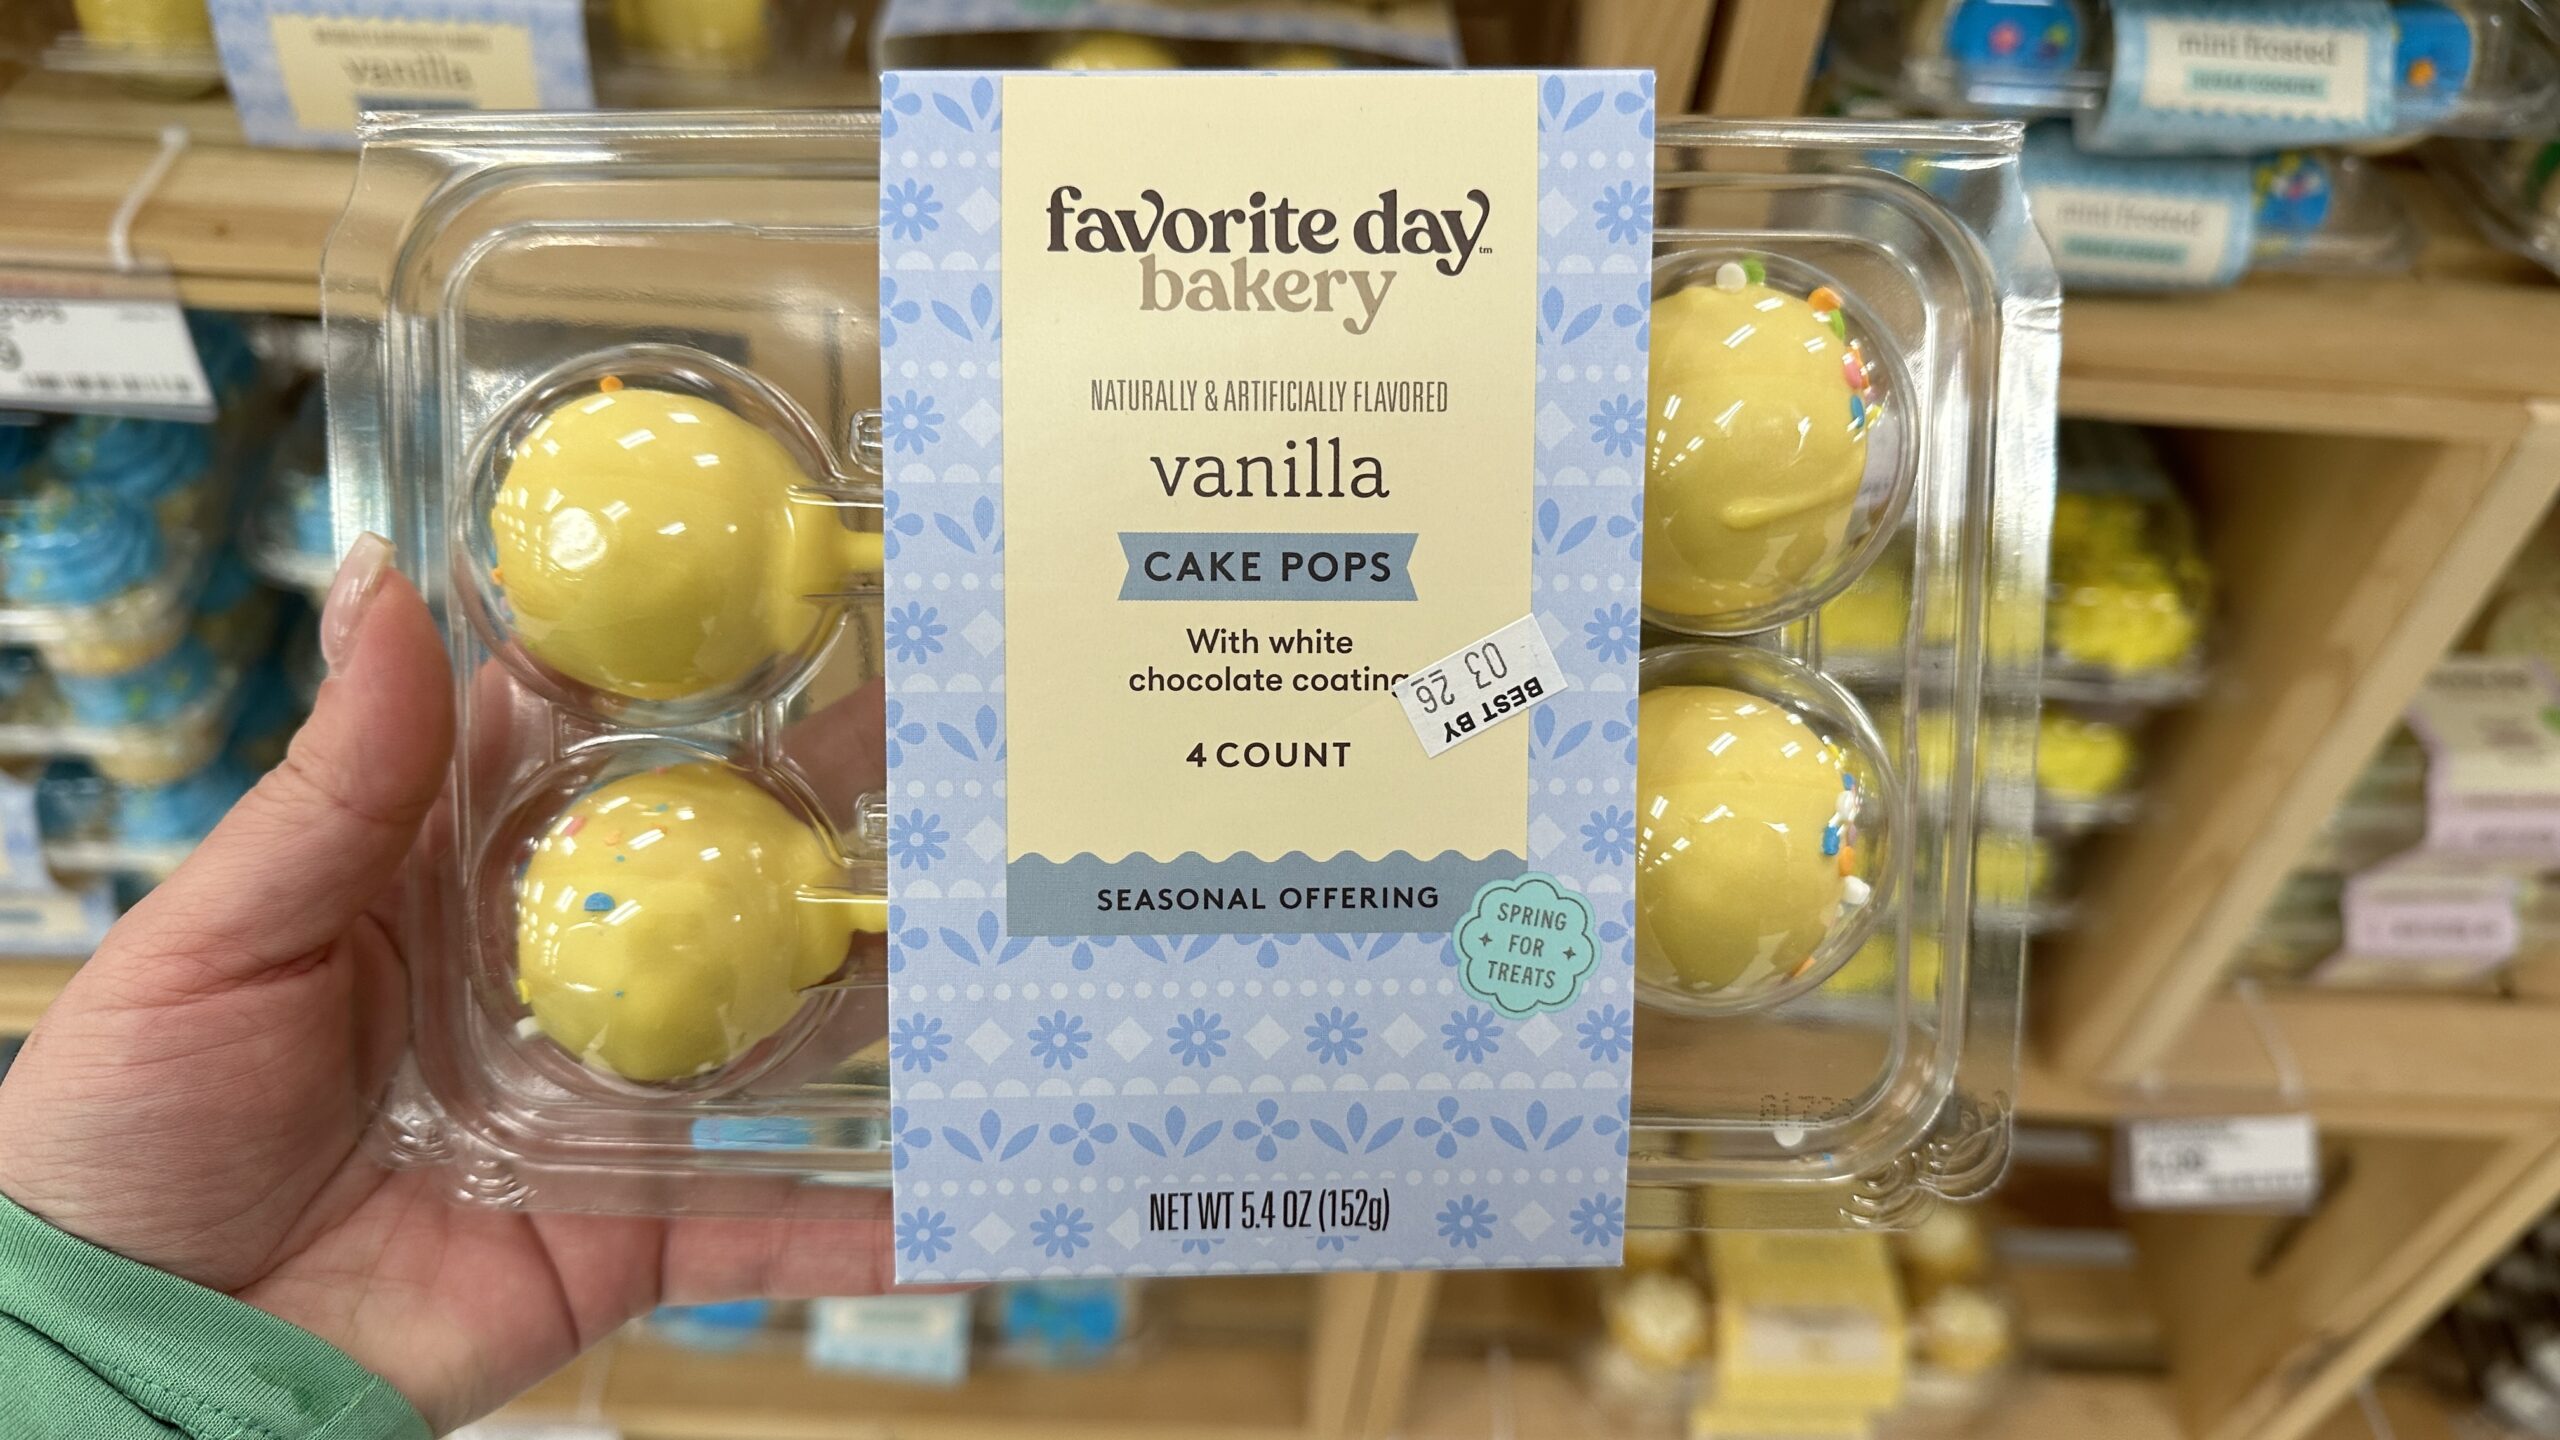 Move Over Starbucks, Target is Selling A 4-Pack of Cake Pops That Taste Like The Real Thing